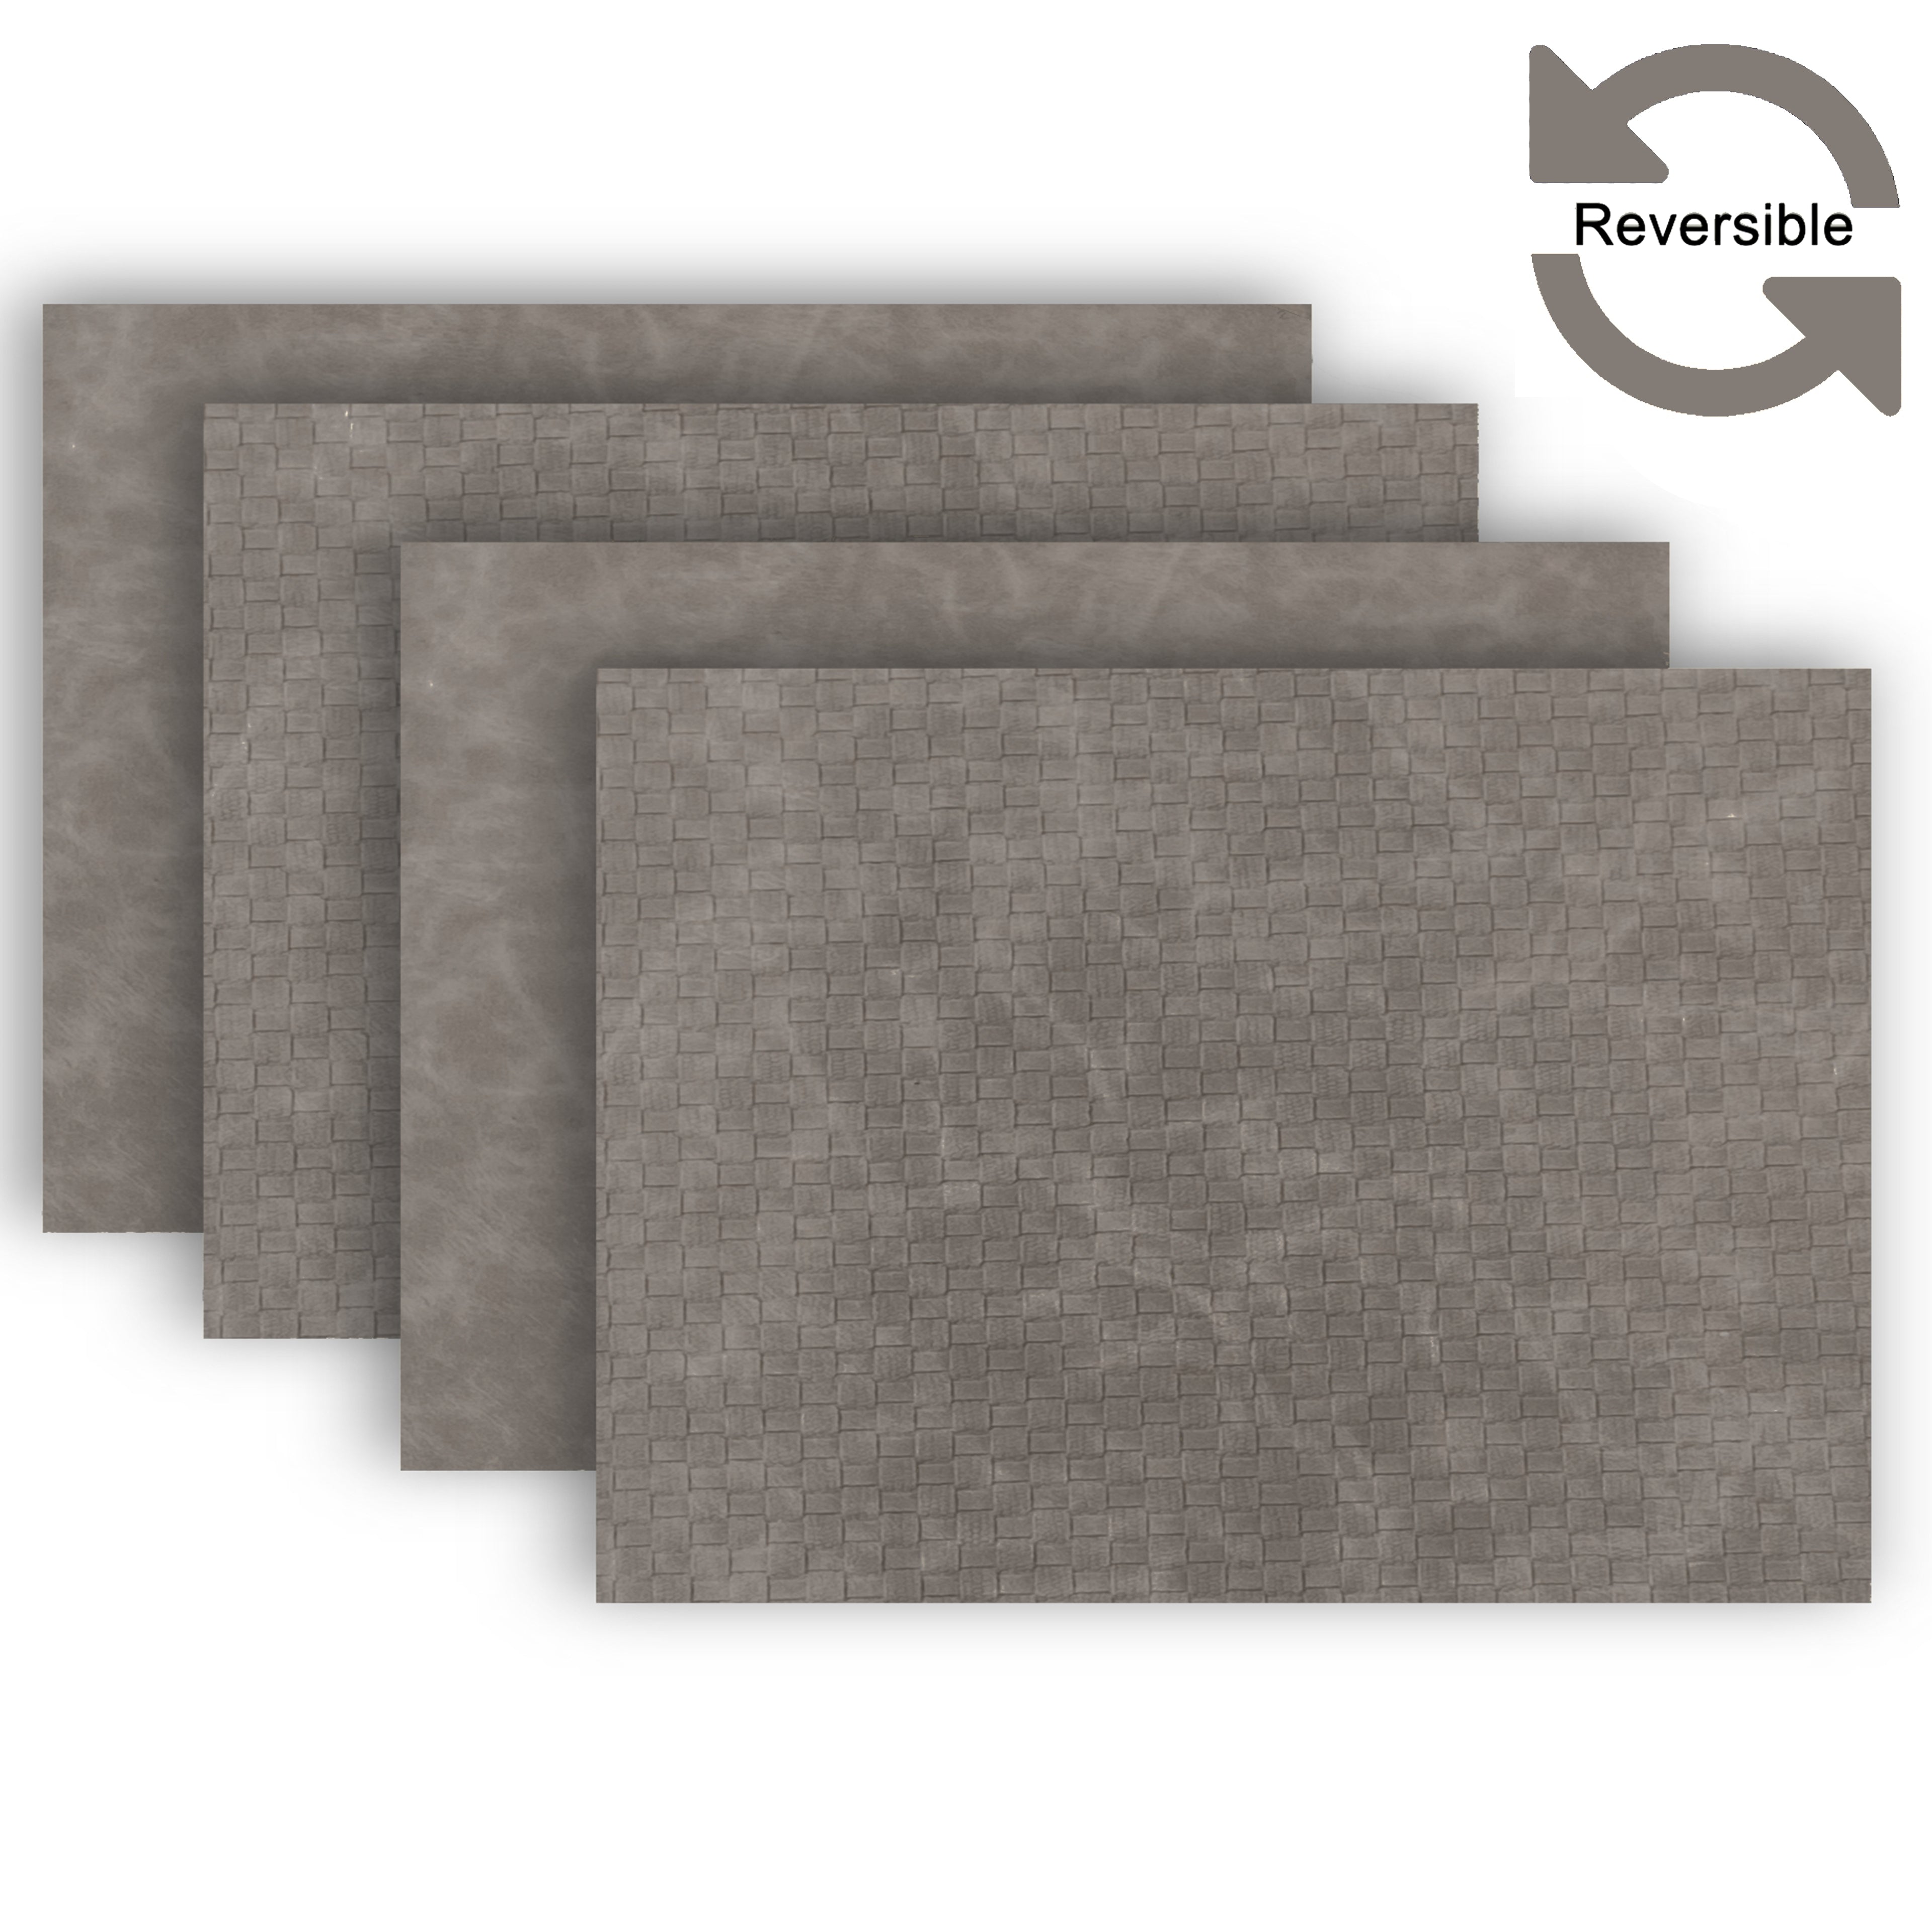 Dainty Home Sorento Faux Leather Reversible 2 Pattern 12" x 18" Rectangular Placemat Set Of 4